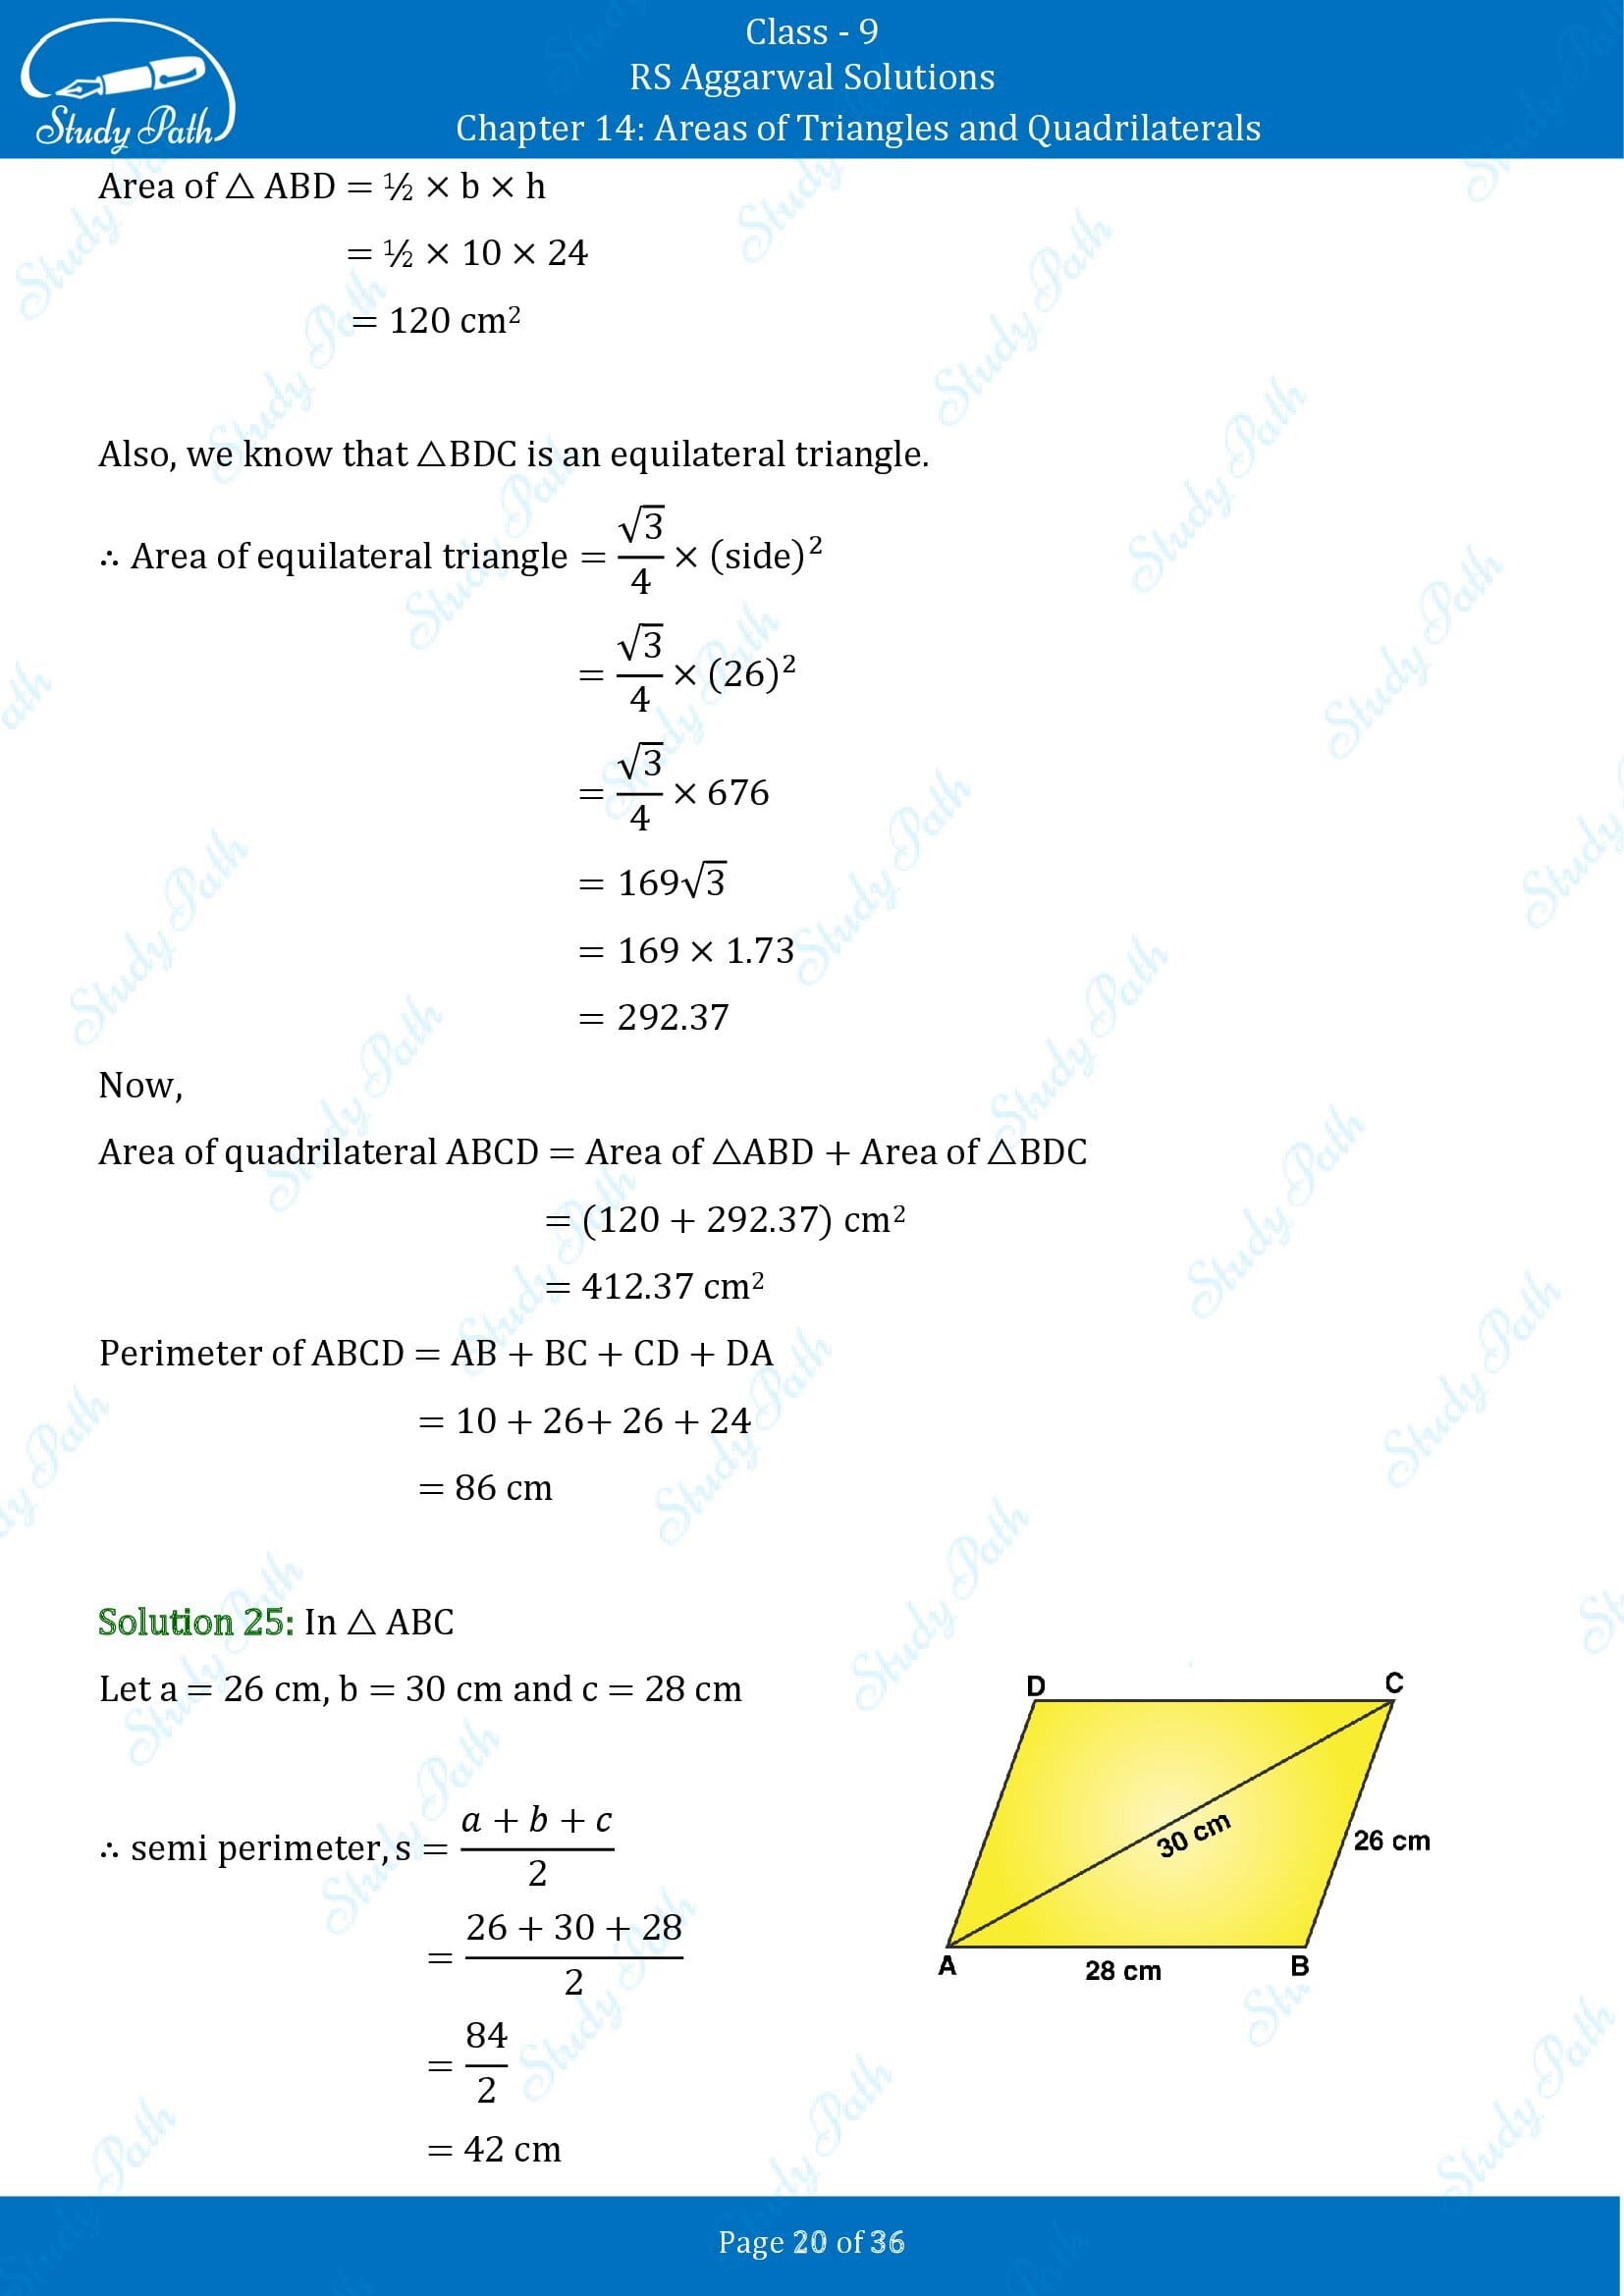 RS Aggarwal Solutions Class 9 Chapter 14 Areas of Triangles and Quadrilaterals Exercise 14 00020